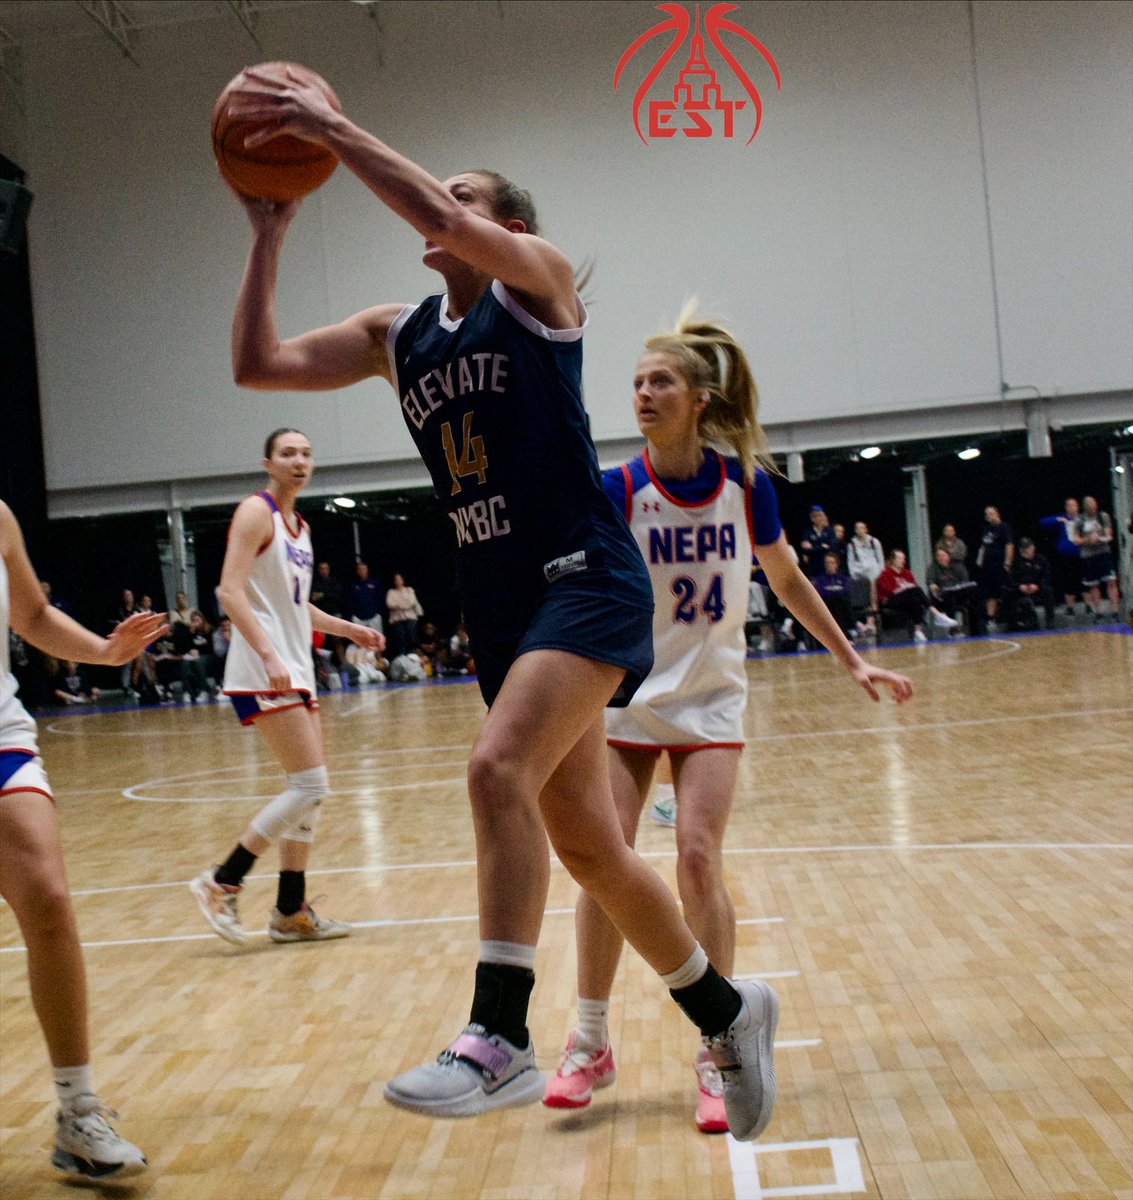 When it’s 2 teams from my coverage region linking, I have to try to include it on the schedule. When they’re fully stocked with future college 🏀 players, it’s a can’t miss. My homeland (@ElevateNYgirls) vs a region that feels more like a second home now (@NEPA_Elite)… views 📸